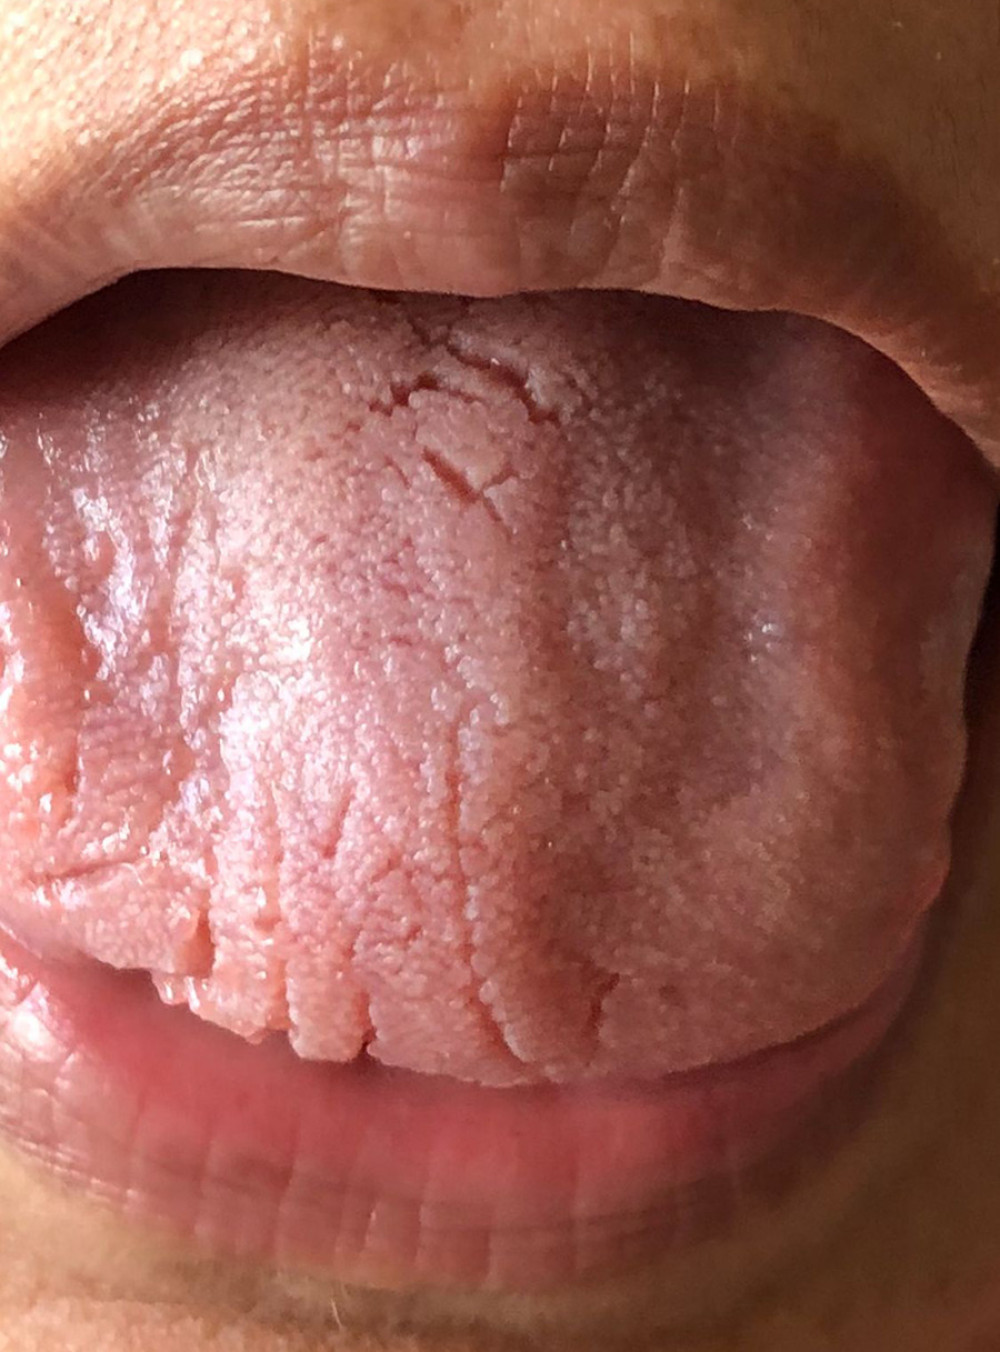 Resolution of glossitis due to an adverse event following immunization with BNT162b2, following tapered dosing of topical corticosteroid therapy.